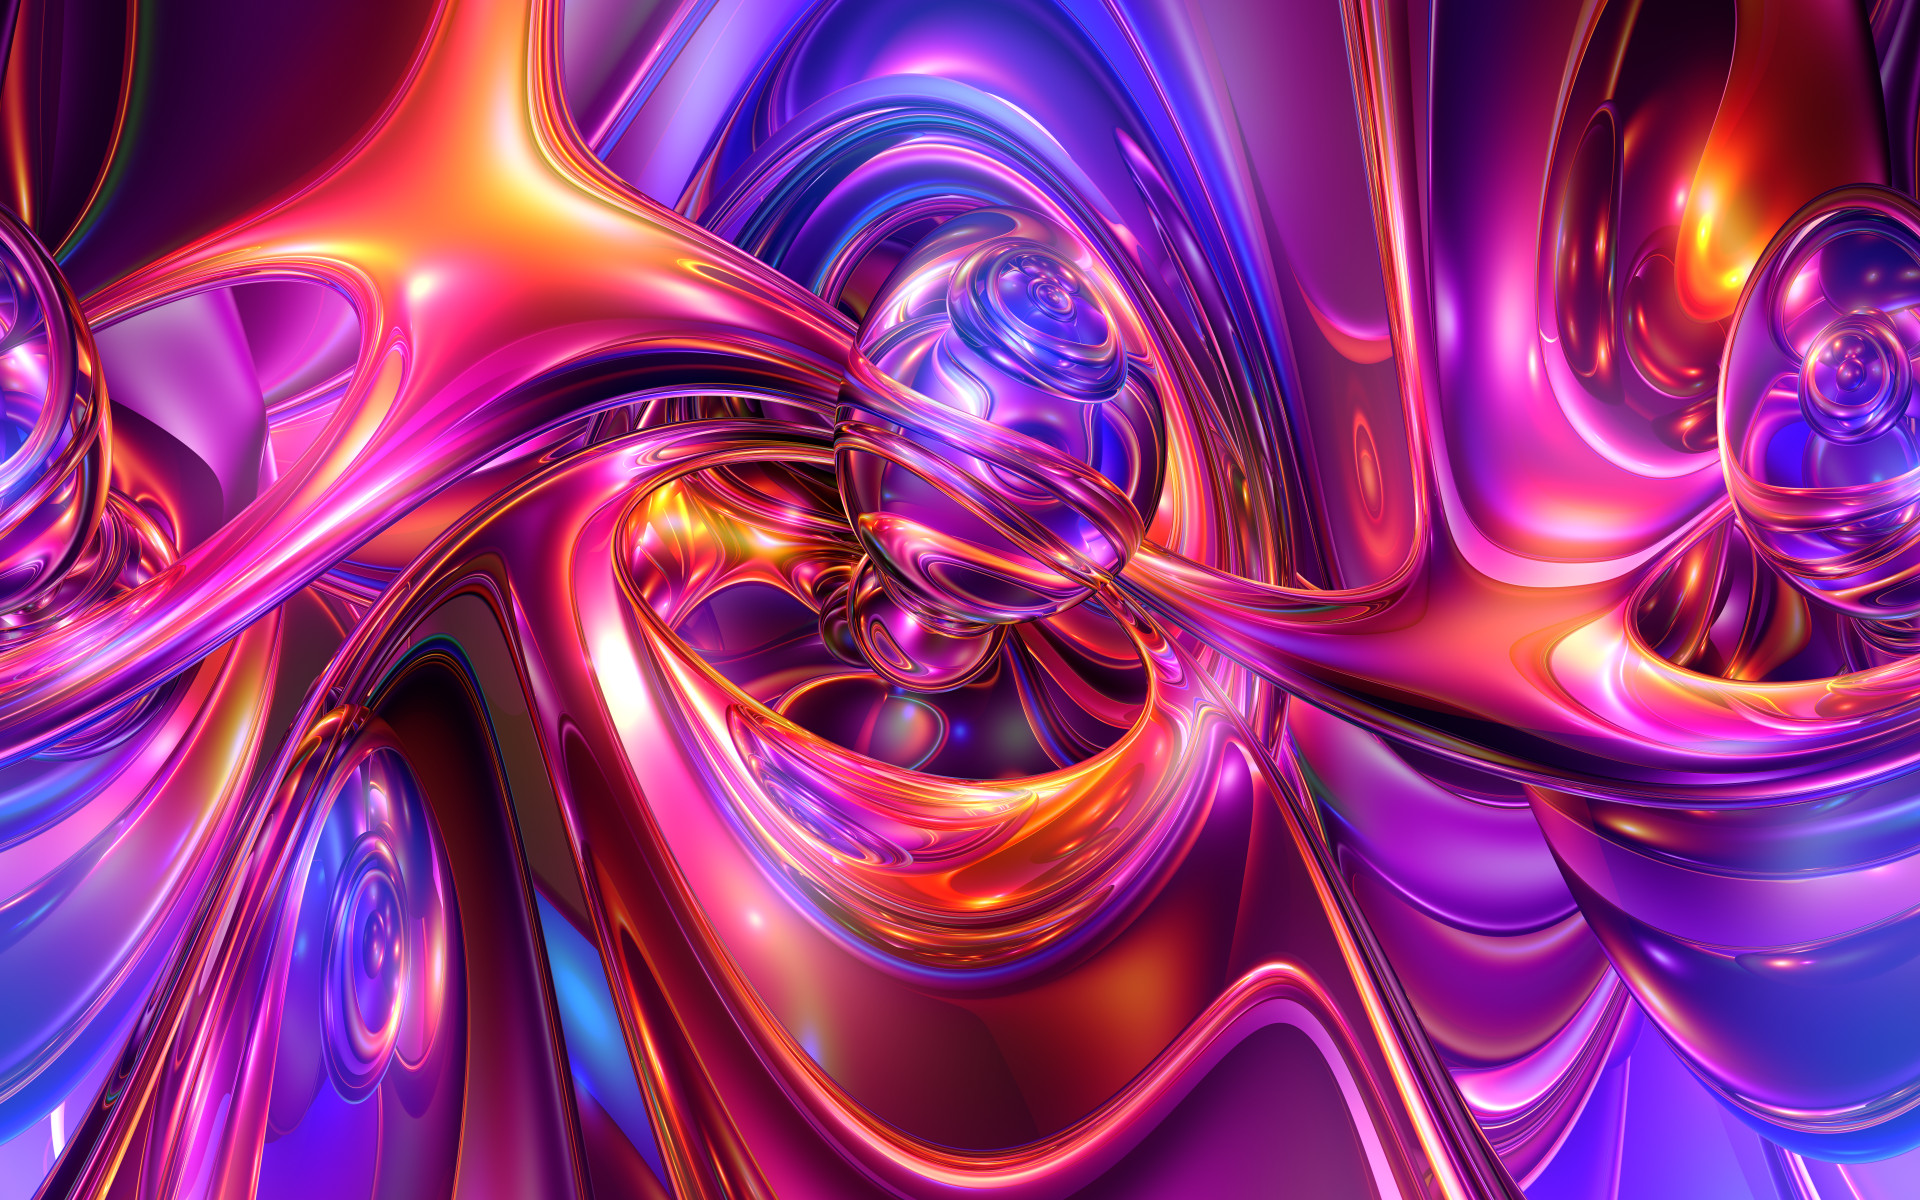 HD desktop wallpaper: Abstract, Pink, 3D, Colors, Purple, Colorful, Swirl,  Cgi download free picture #658344